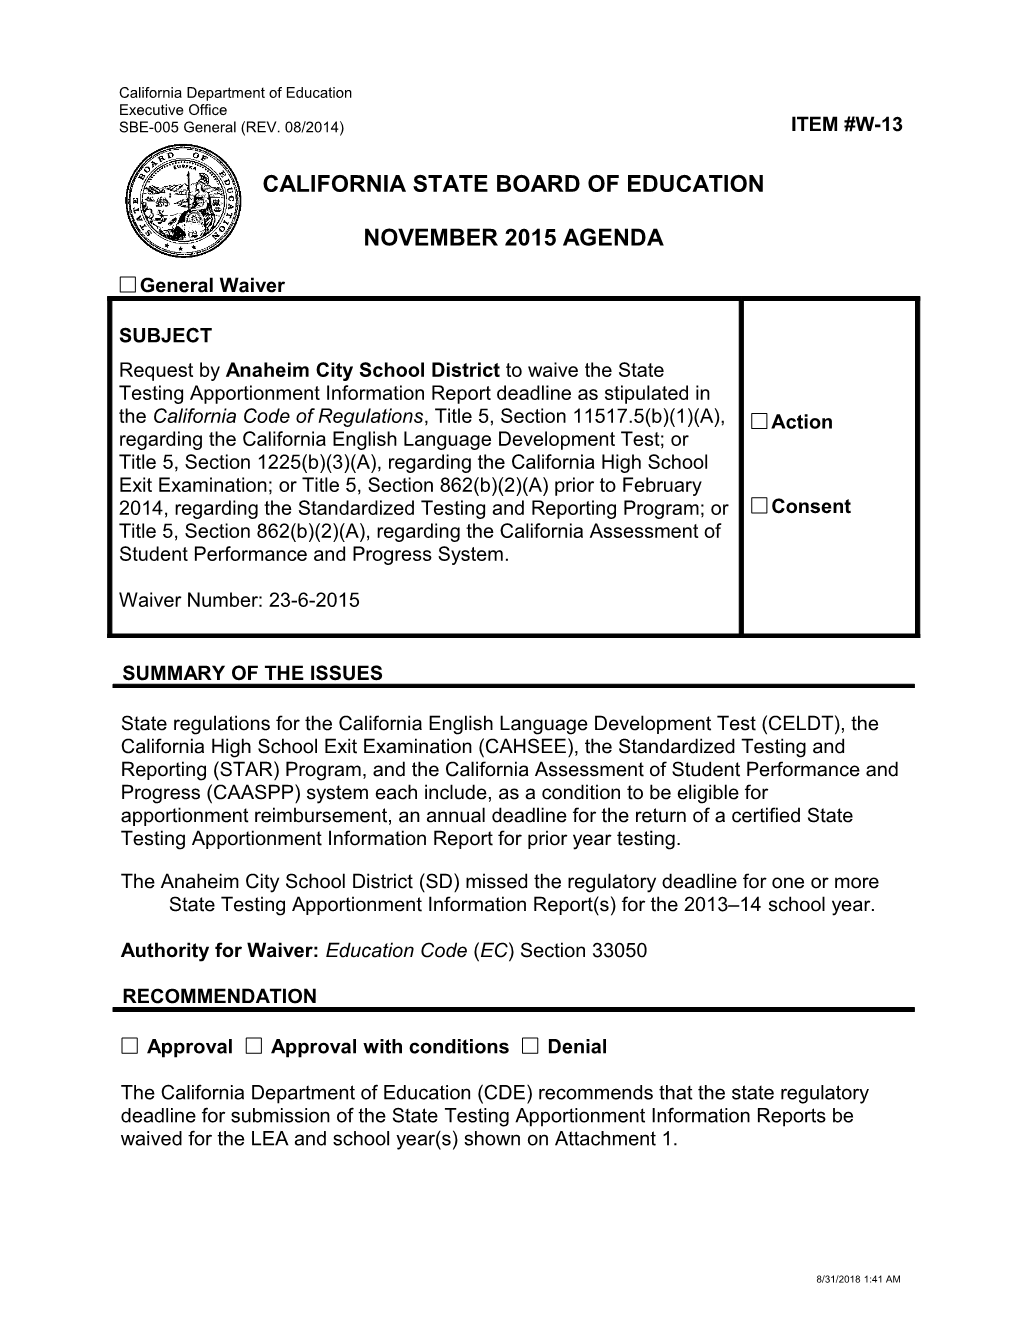 November 2015 Waiver Item W-13 - Meeting Agendas (CA State Board of Education)